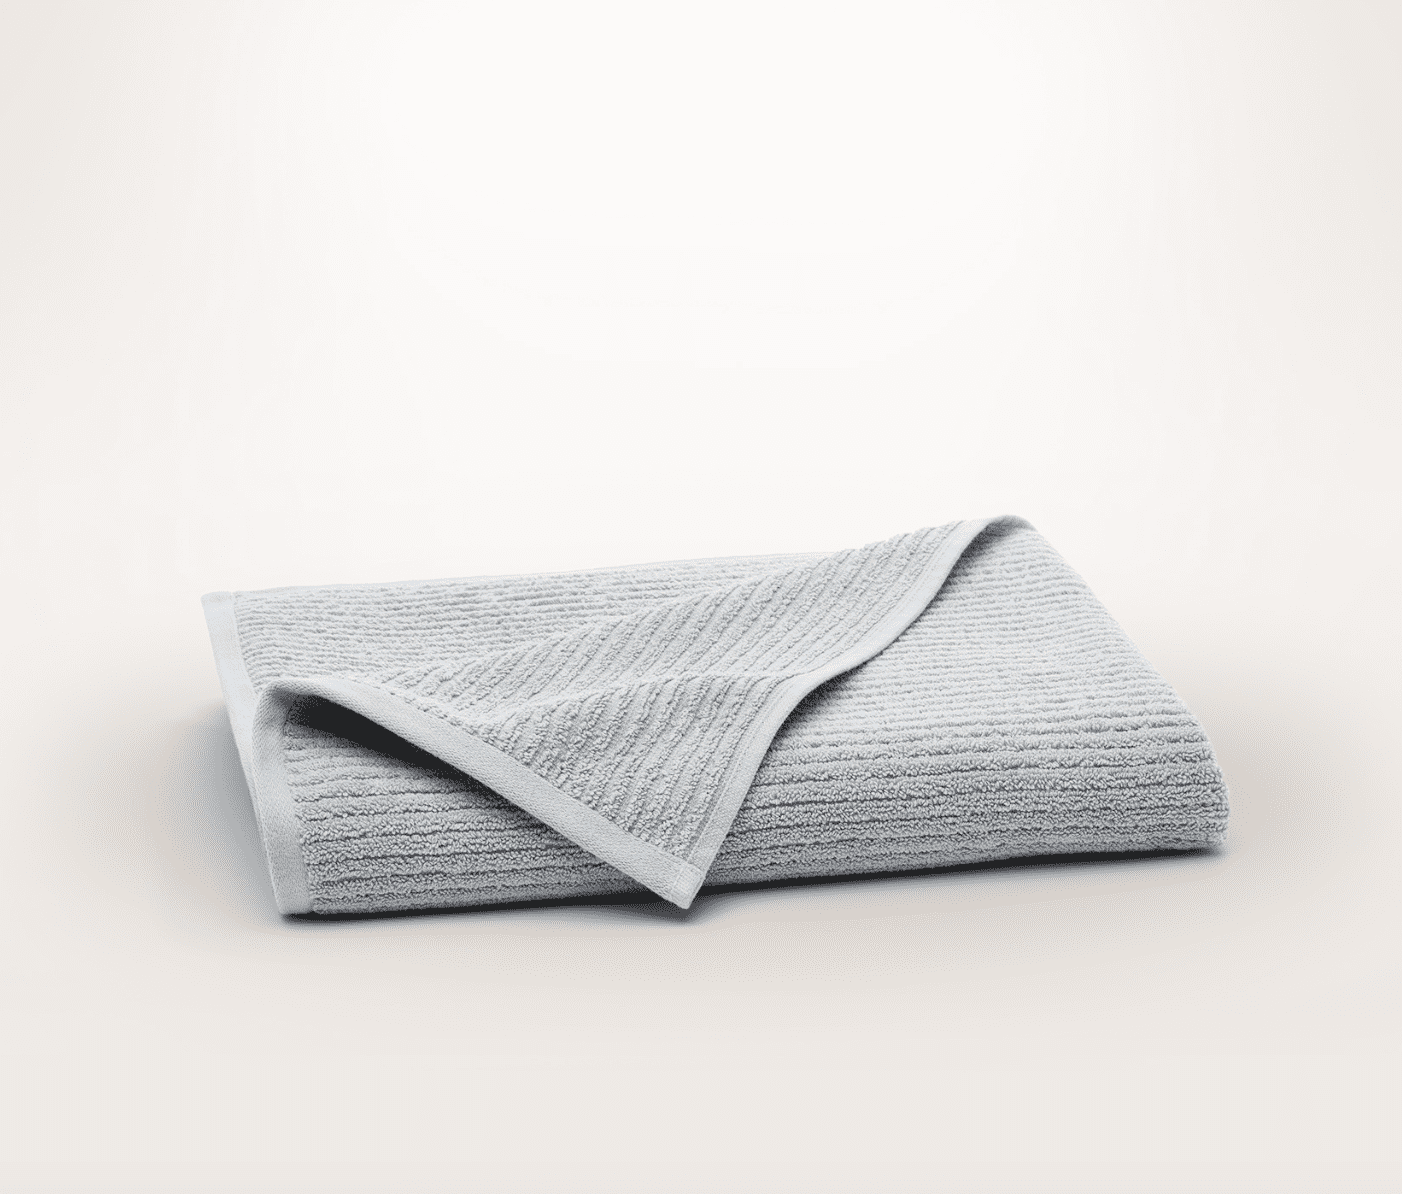 https://cdn.apartmenttherapy.info/image/upload/v1679084153/gen-workflow/product-database/boll-and-branch-spa-towel-product-image.png